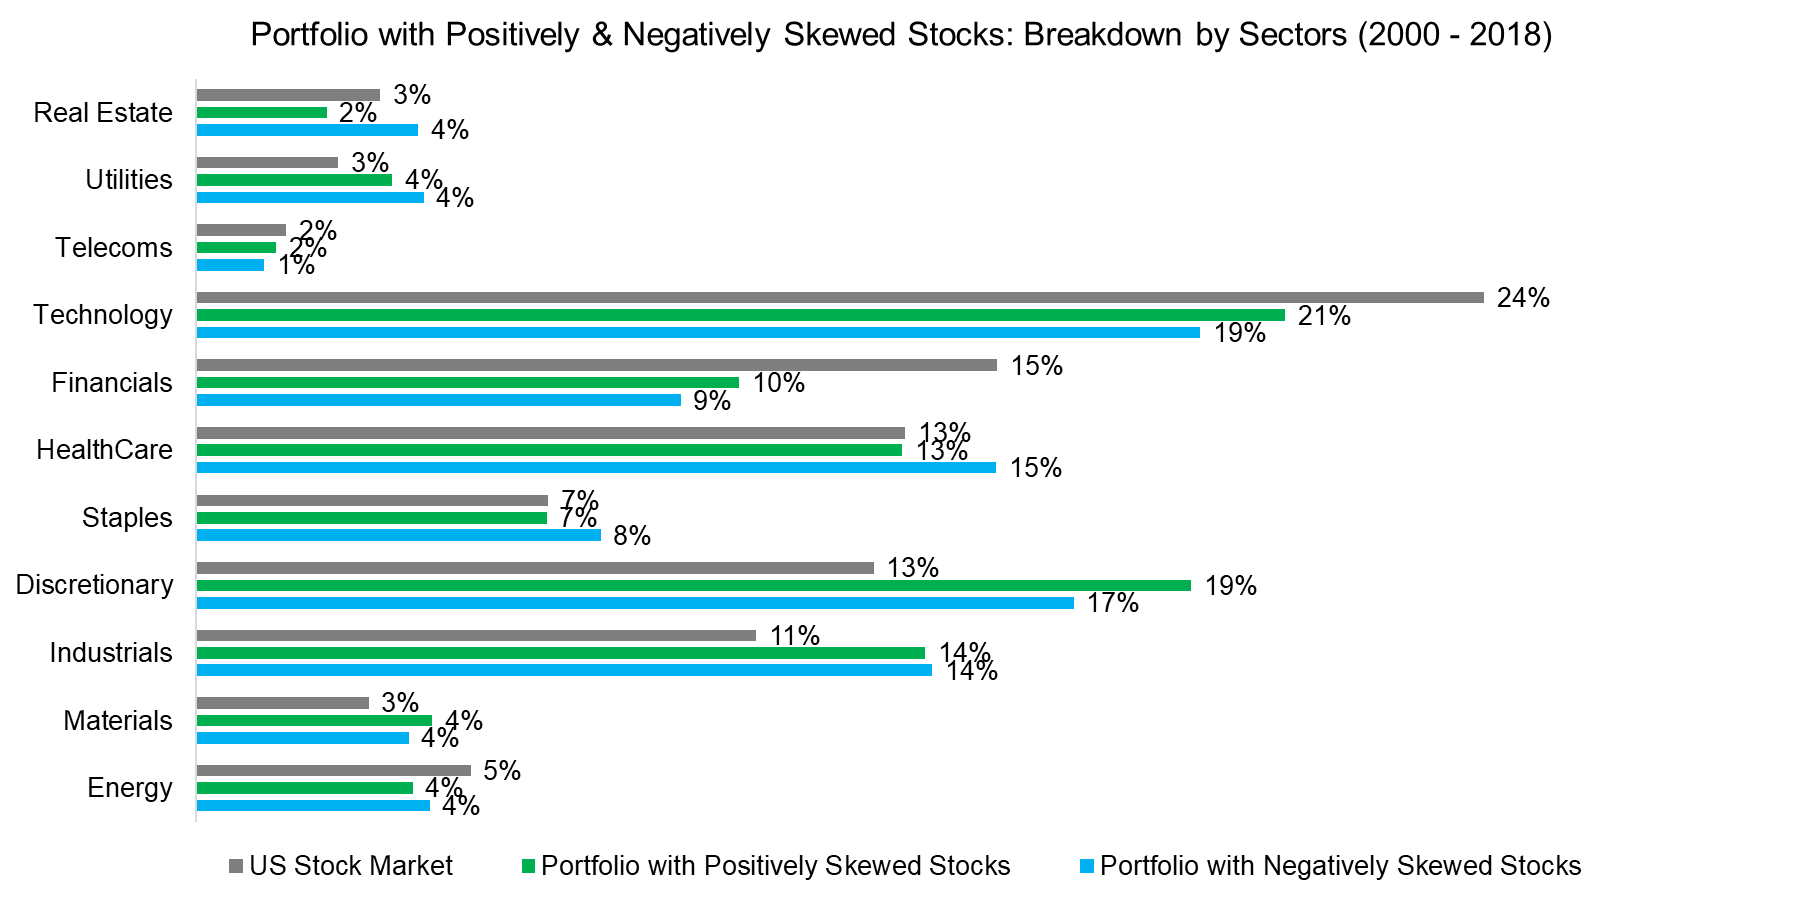 Portfolio with Positively & Negatively Skewed Stocks Breakdown by Sectors